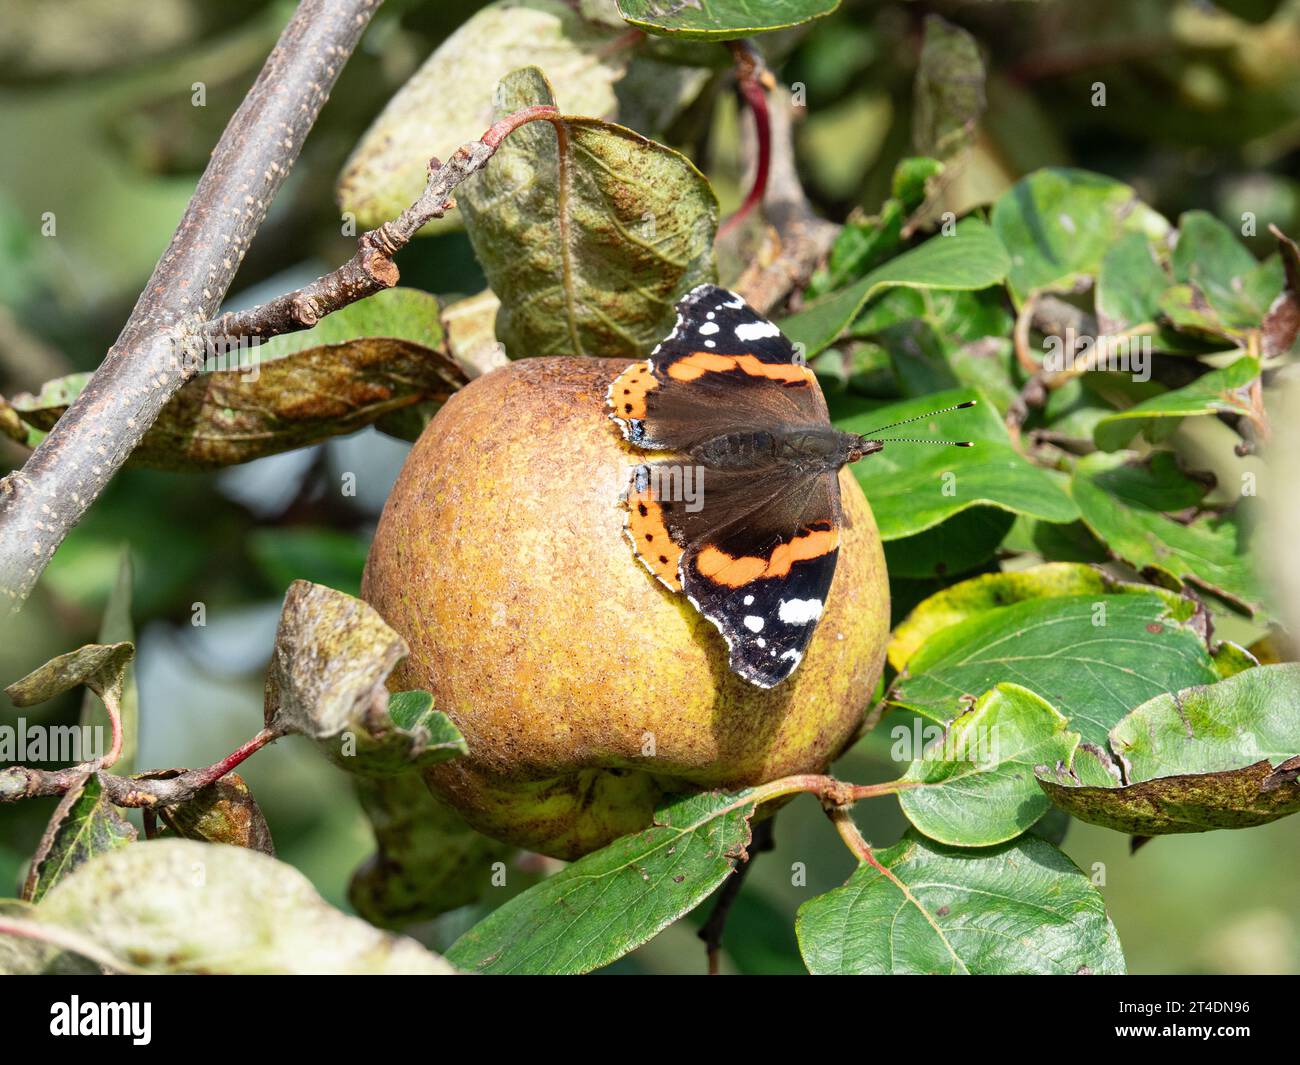 A Red Admiral butterfly (Vanessa atalanta) spreading its wings in the sunshine on an apple Stock Photo